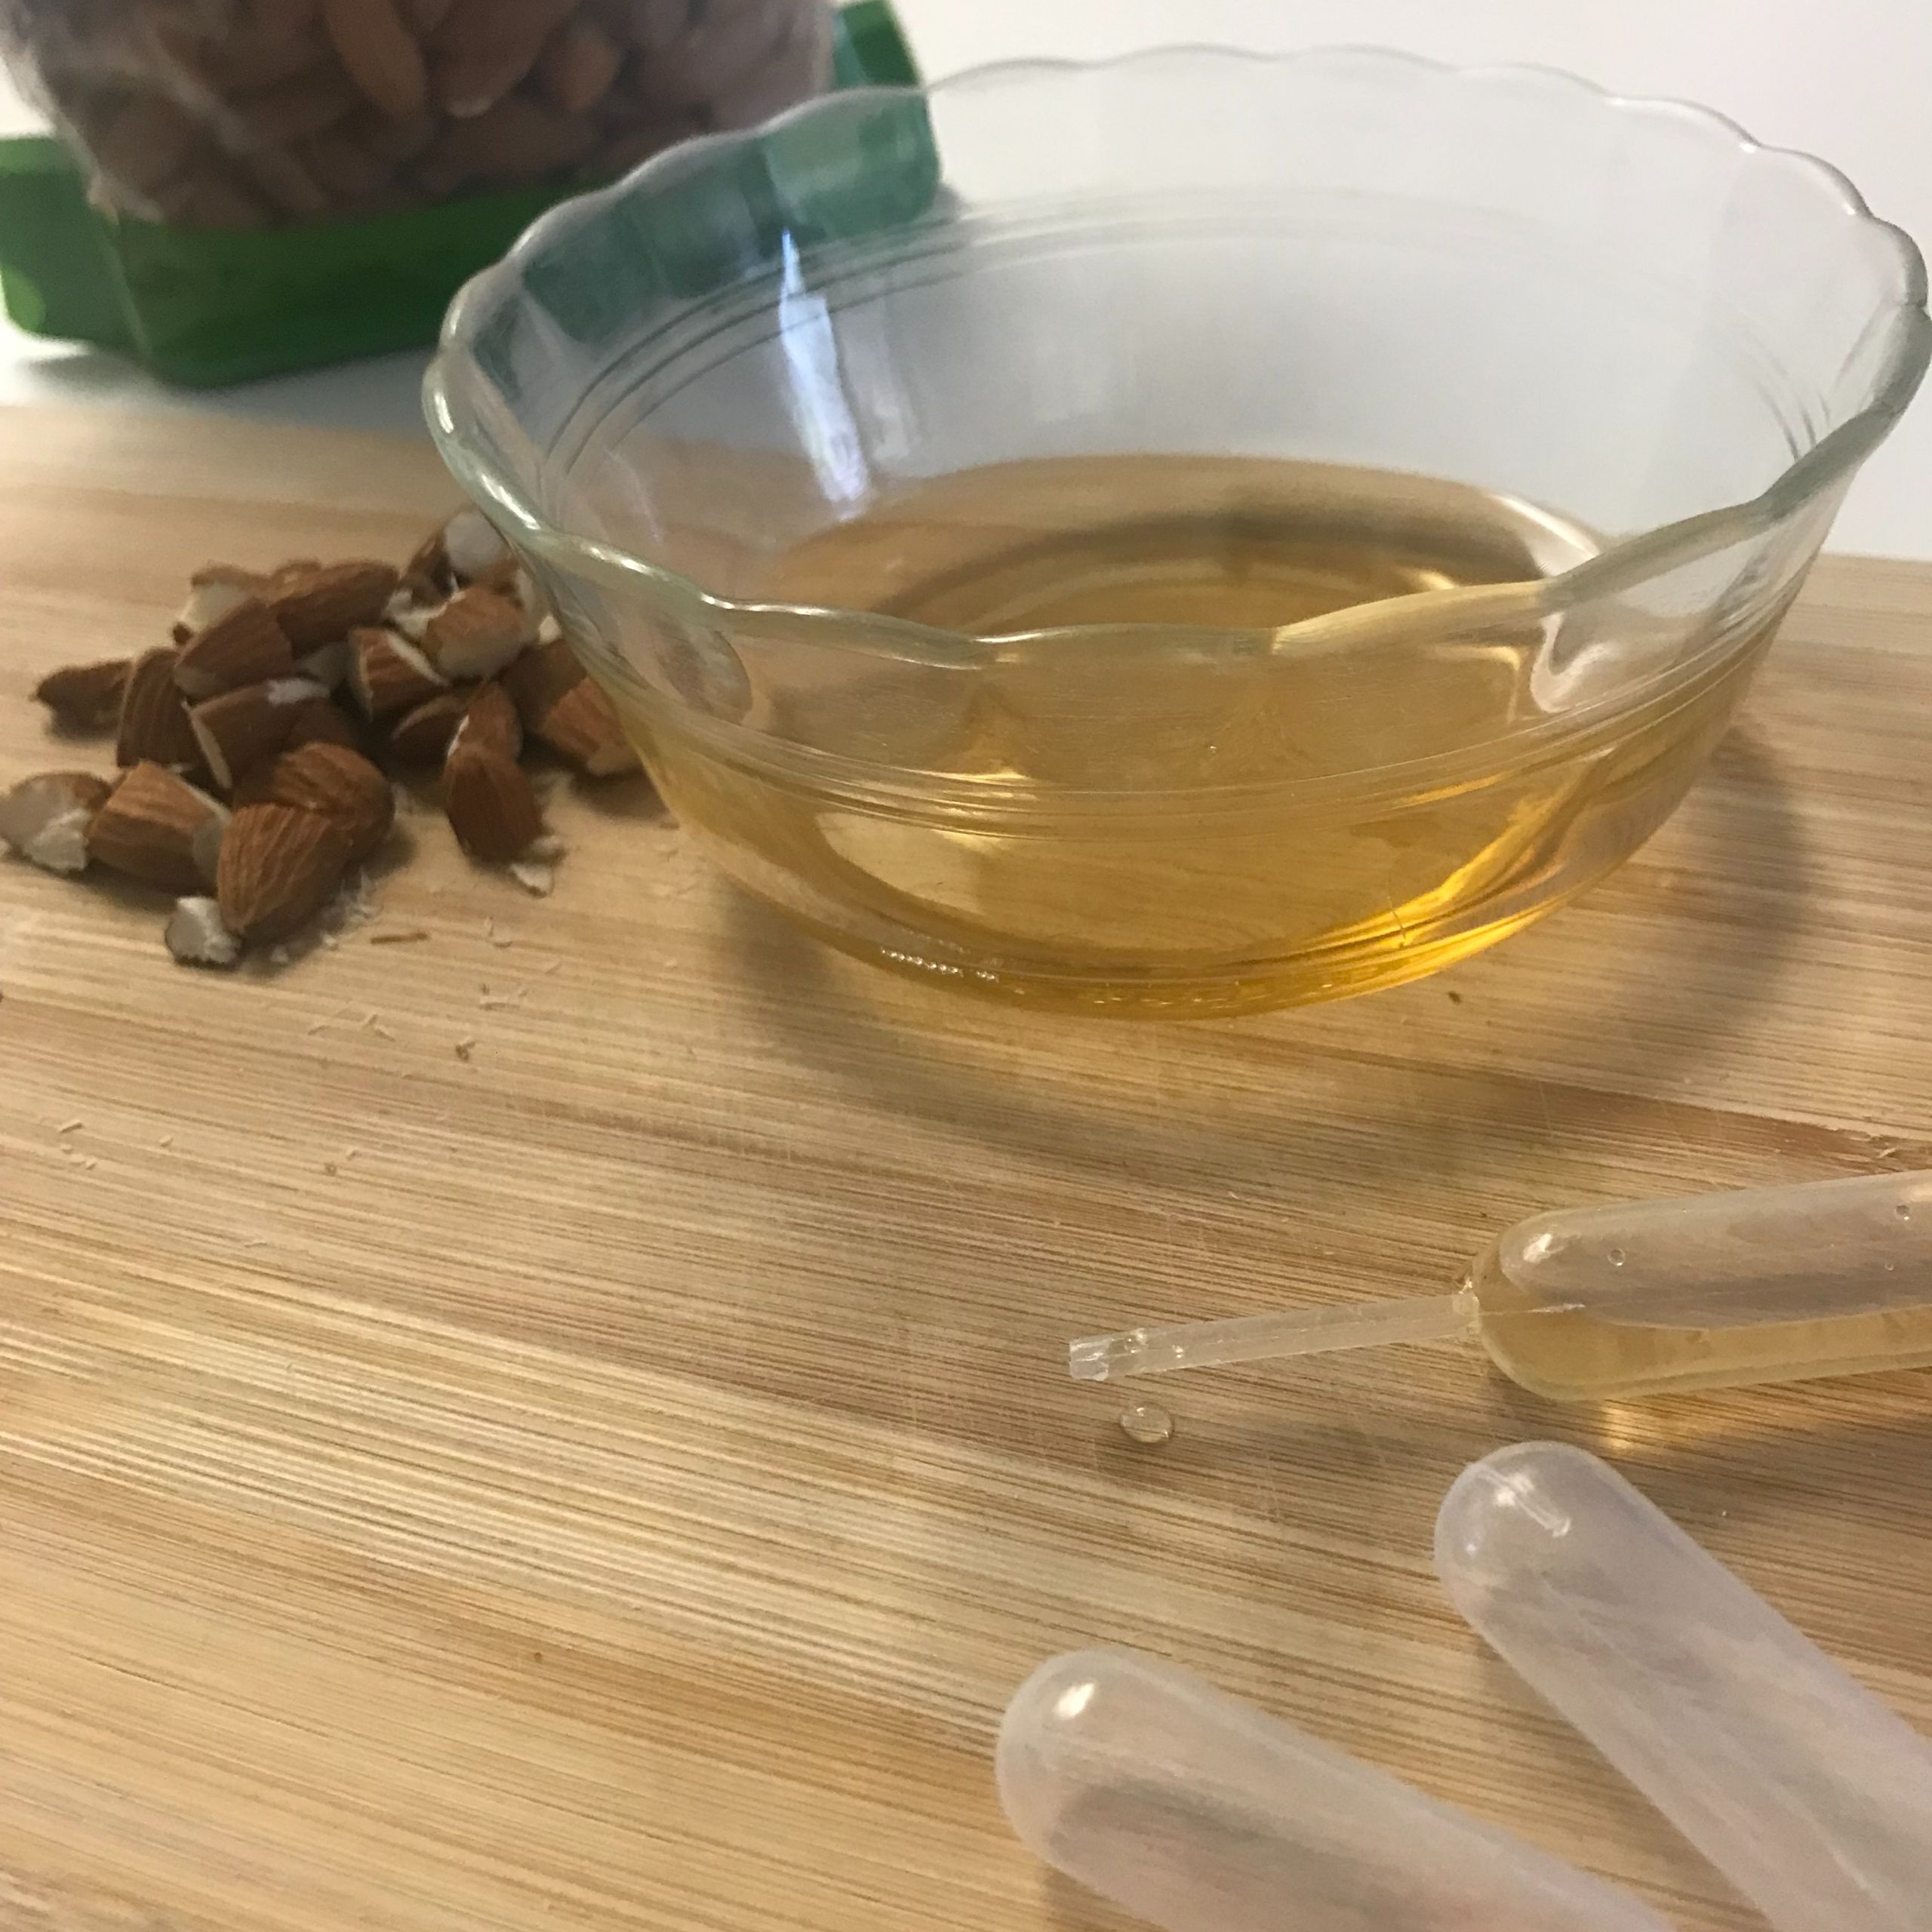 amaretto in a dish, chopped almonds and plastic syringes